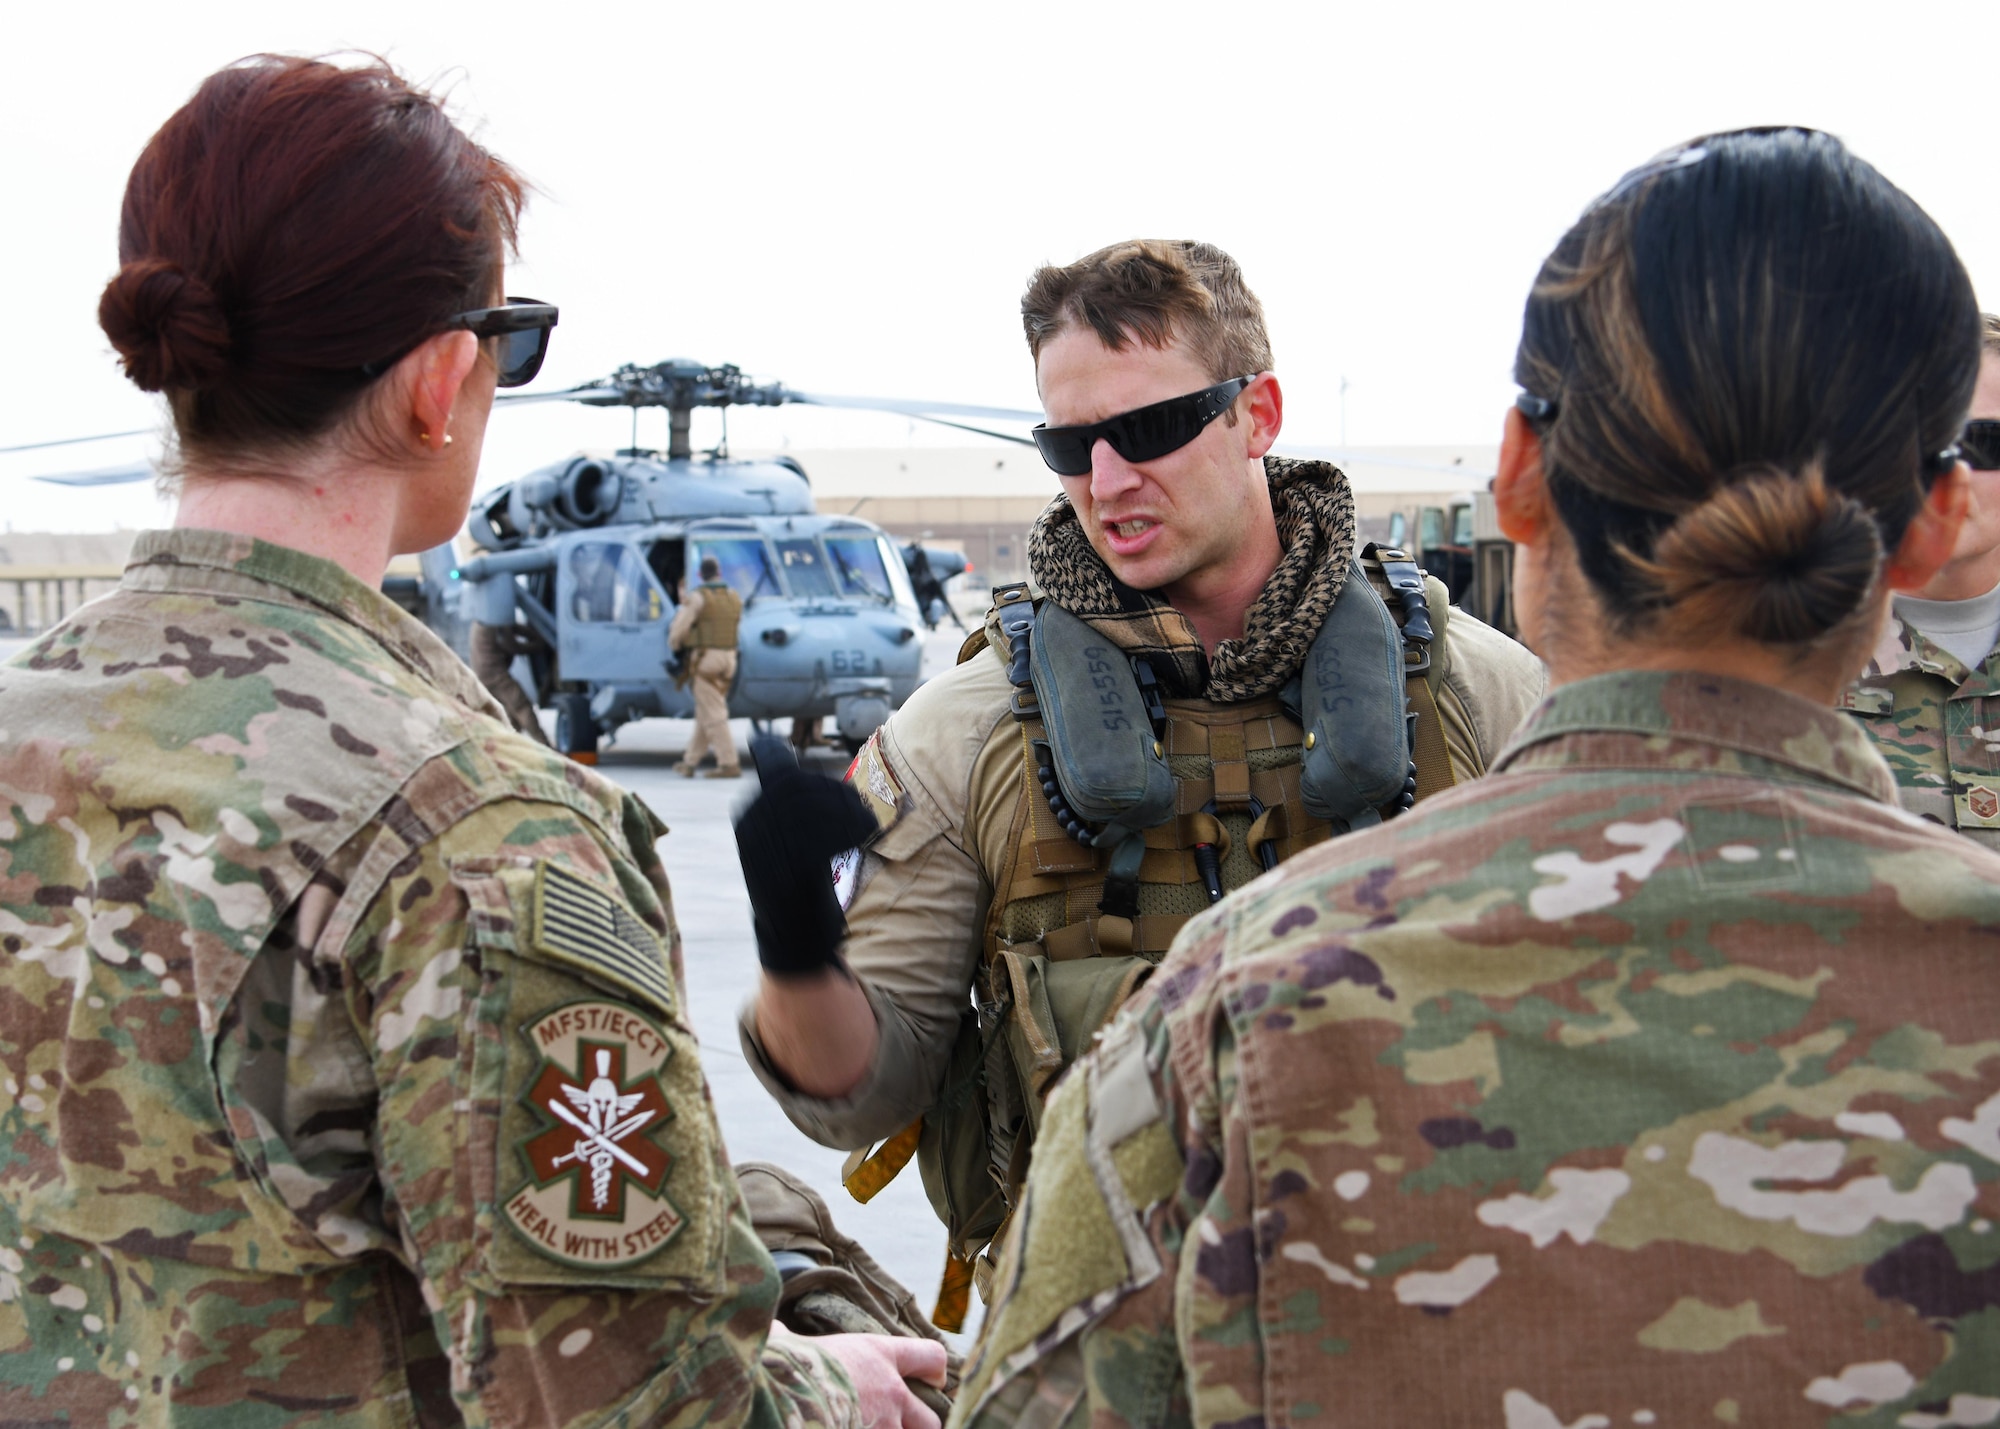 U.S. Navy Petty Officer 2nd Class Nick Flynn, a naval aircrewman assigned to Helicopter Sea Combat Squadron 26, gives a flight safety briefing to members of the 379th Expeditionary Medical Operations Squadron mobile field surgical and expeditionary critical care teams at Al Udeid Air Base, Qatar, Jan. 23, 2016. The medical team departed onboard two SH-60 Seahawks to join Royal Navy forces aboard the HMS Ocean for a coalition exercise where they will simulate providing care to casualties at sea. (U.S. Air Force photo by Senior Airman Miles Wilson)